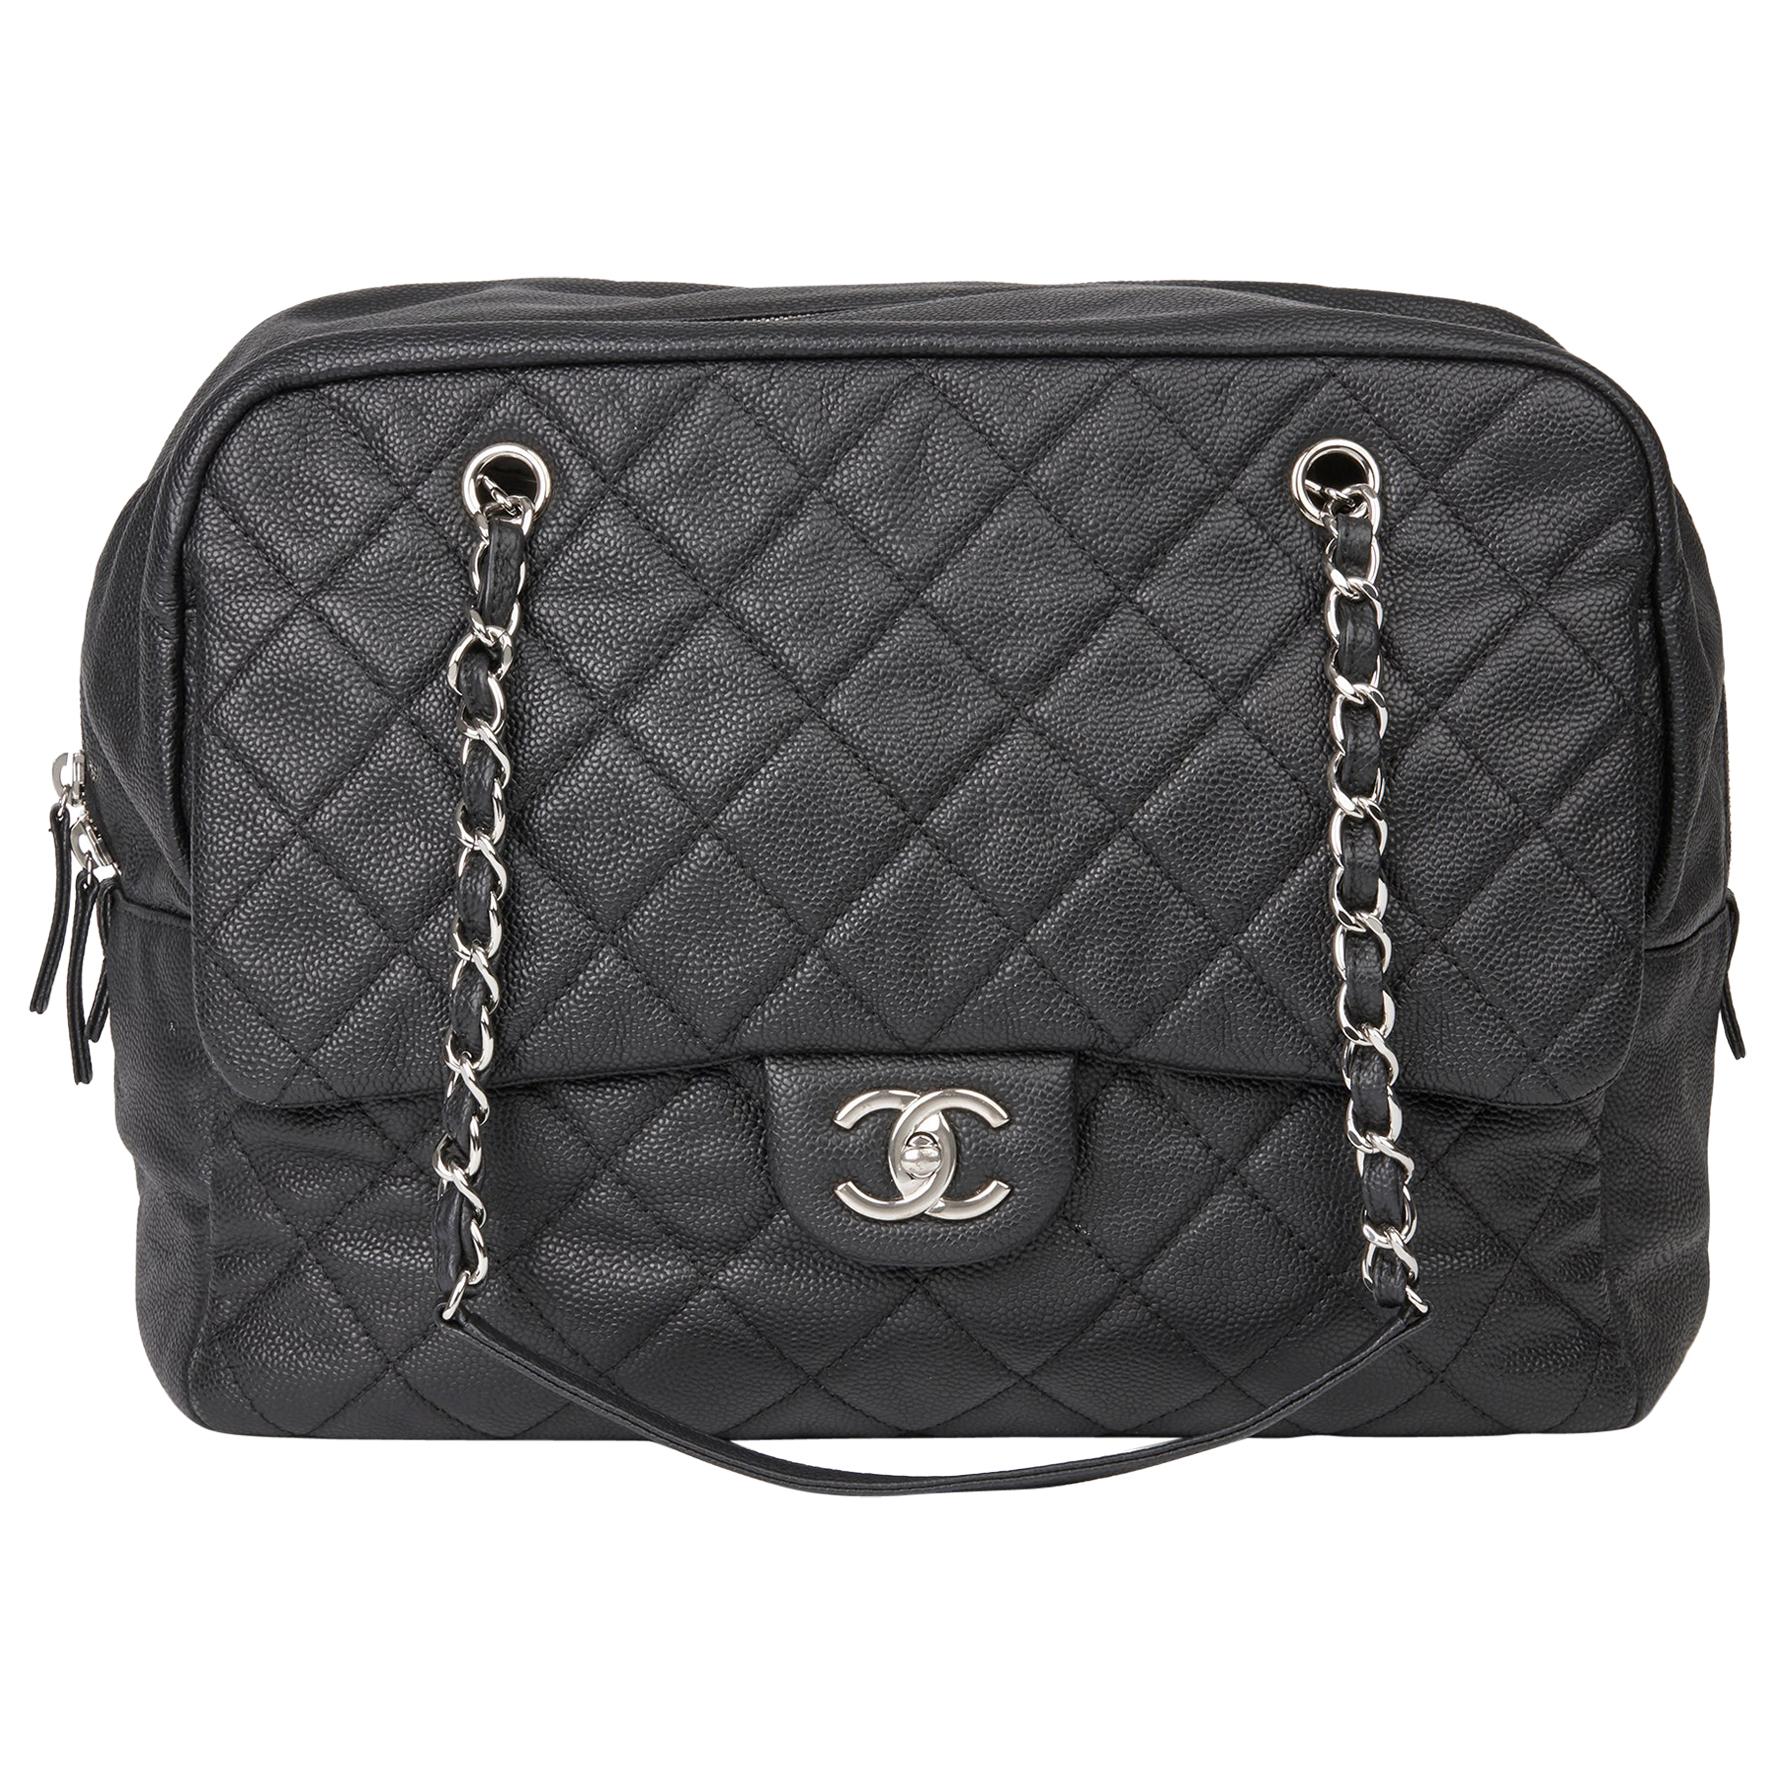 2015 Chanel Black Quilted Caviar Leather Jumbo Classic Camera Bag at ...